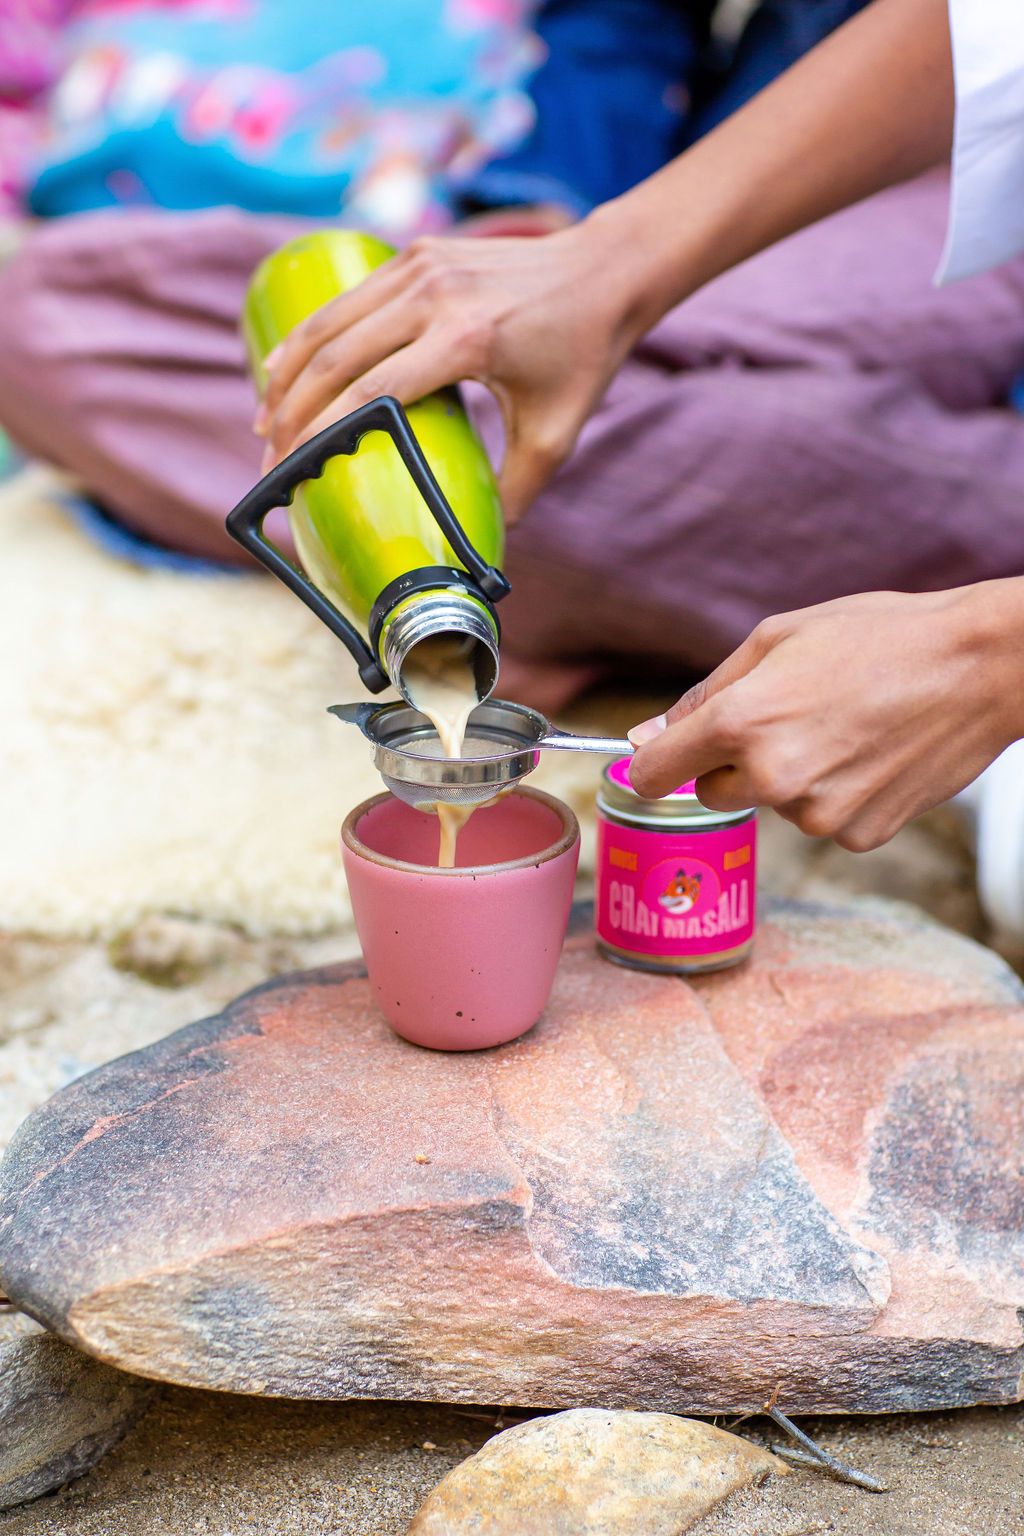 A tan and milky beverage pours from a bright green thermos into a hot pink cup on a salmon colored rock alongside the Hungry River